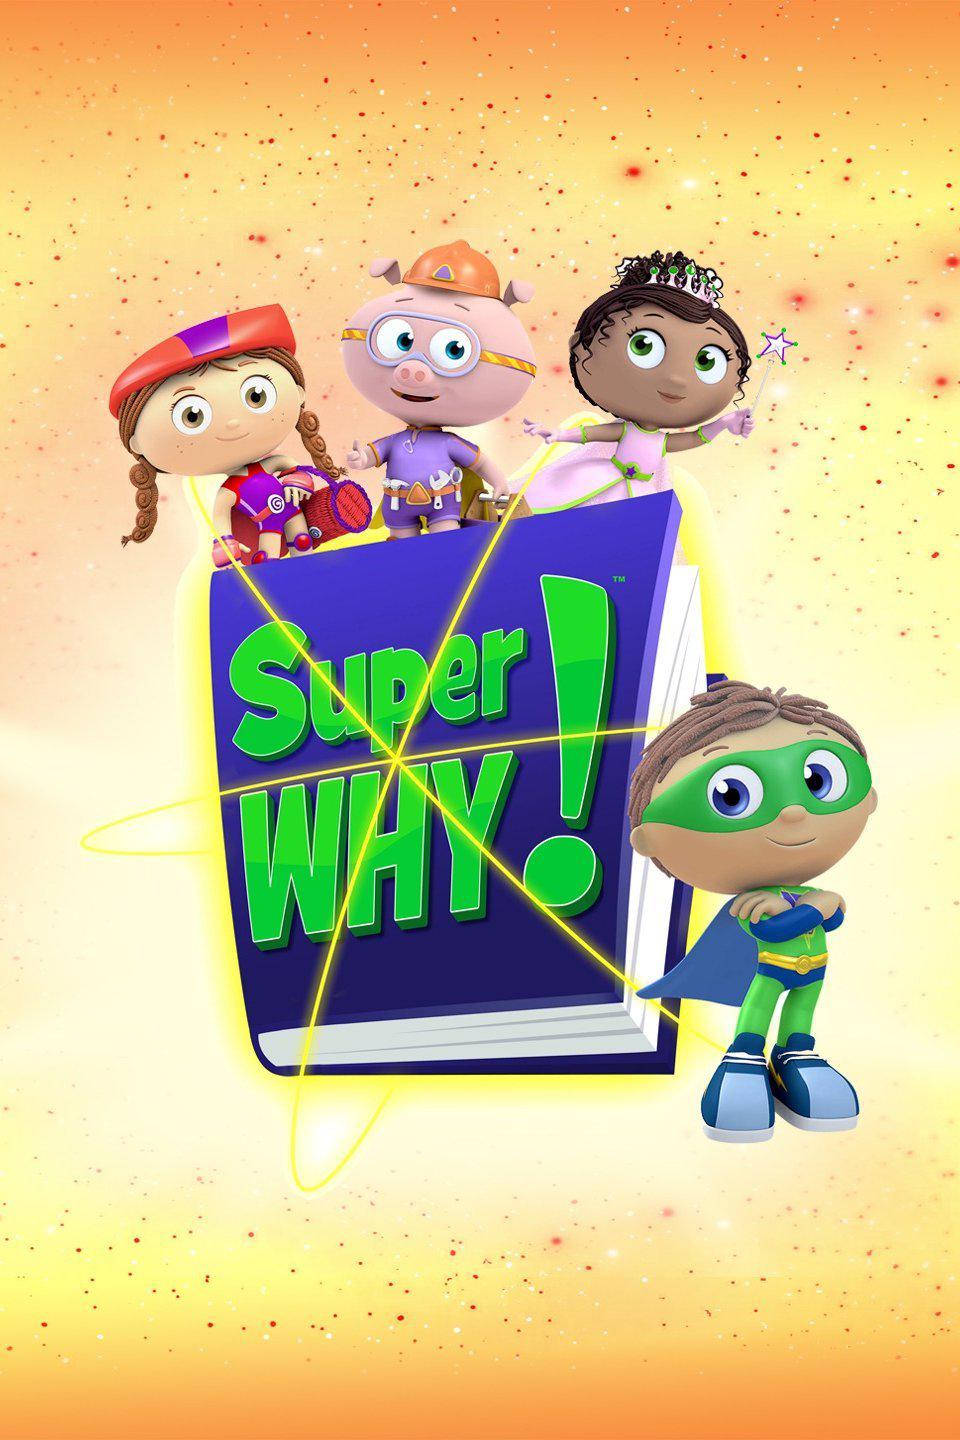 Super Why! (PBS): New Zealand daily TV audience insights for smarter  content decisions - Parrot Analytics